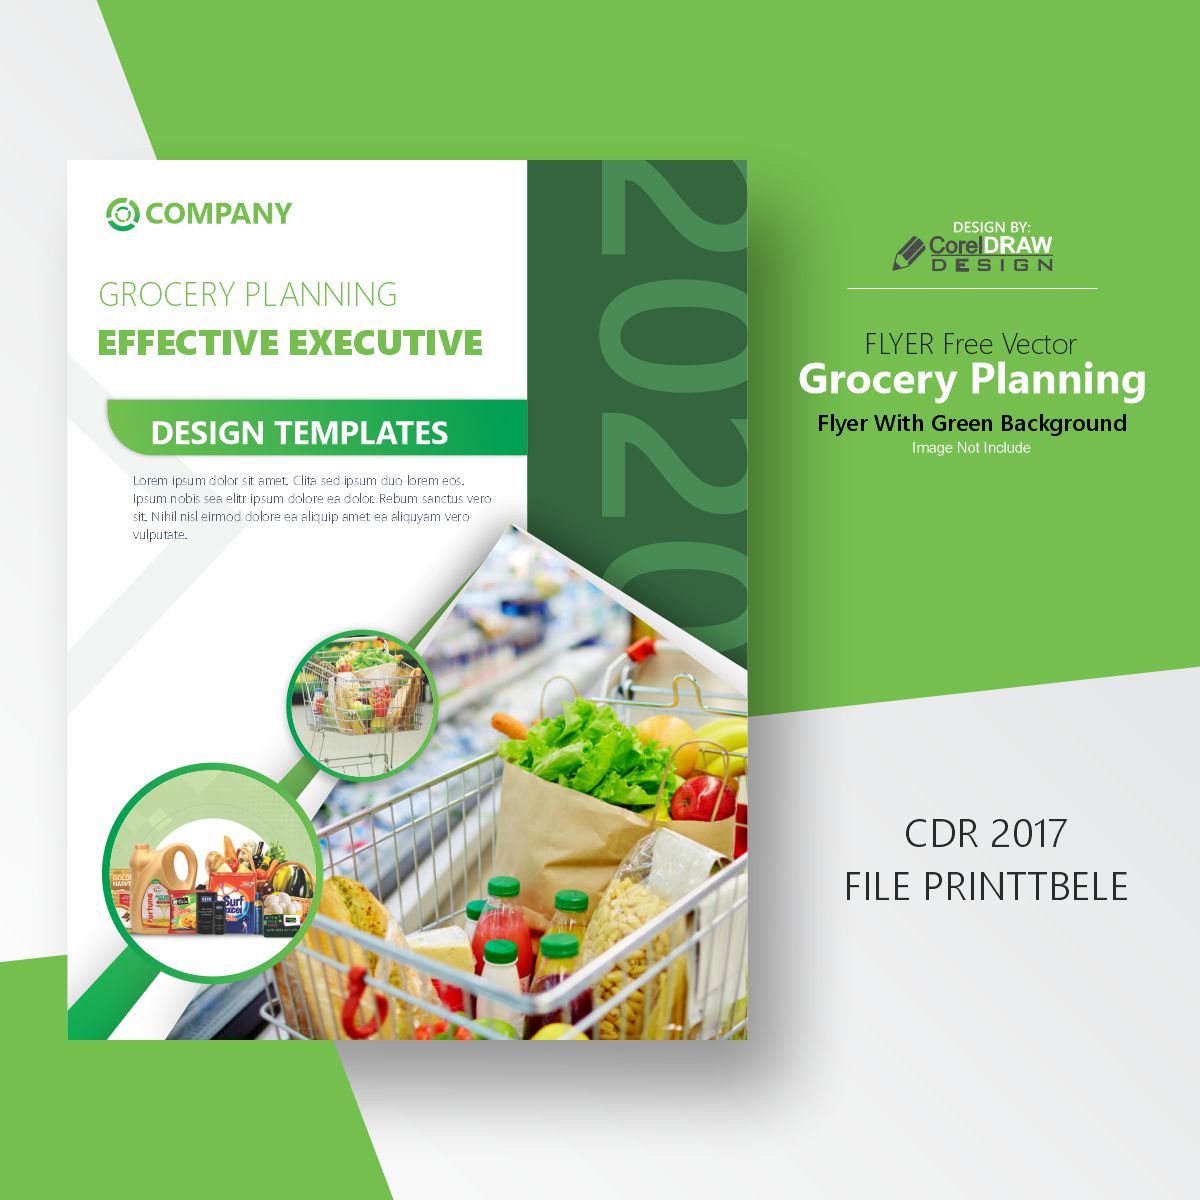 Grocery Planning Flyer With Green Background